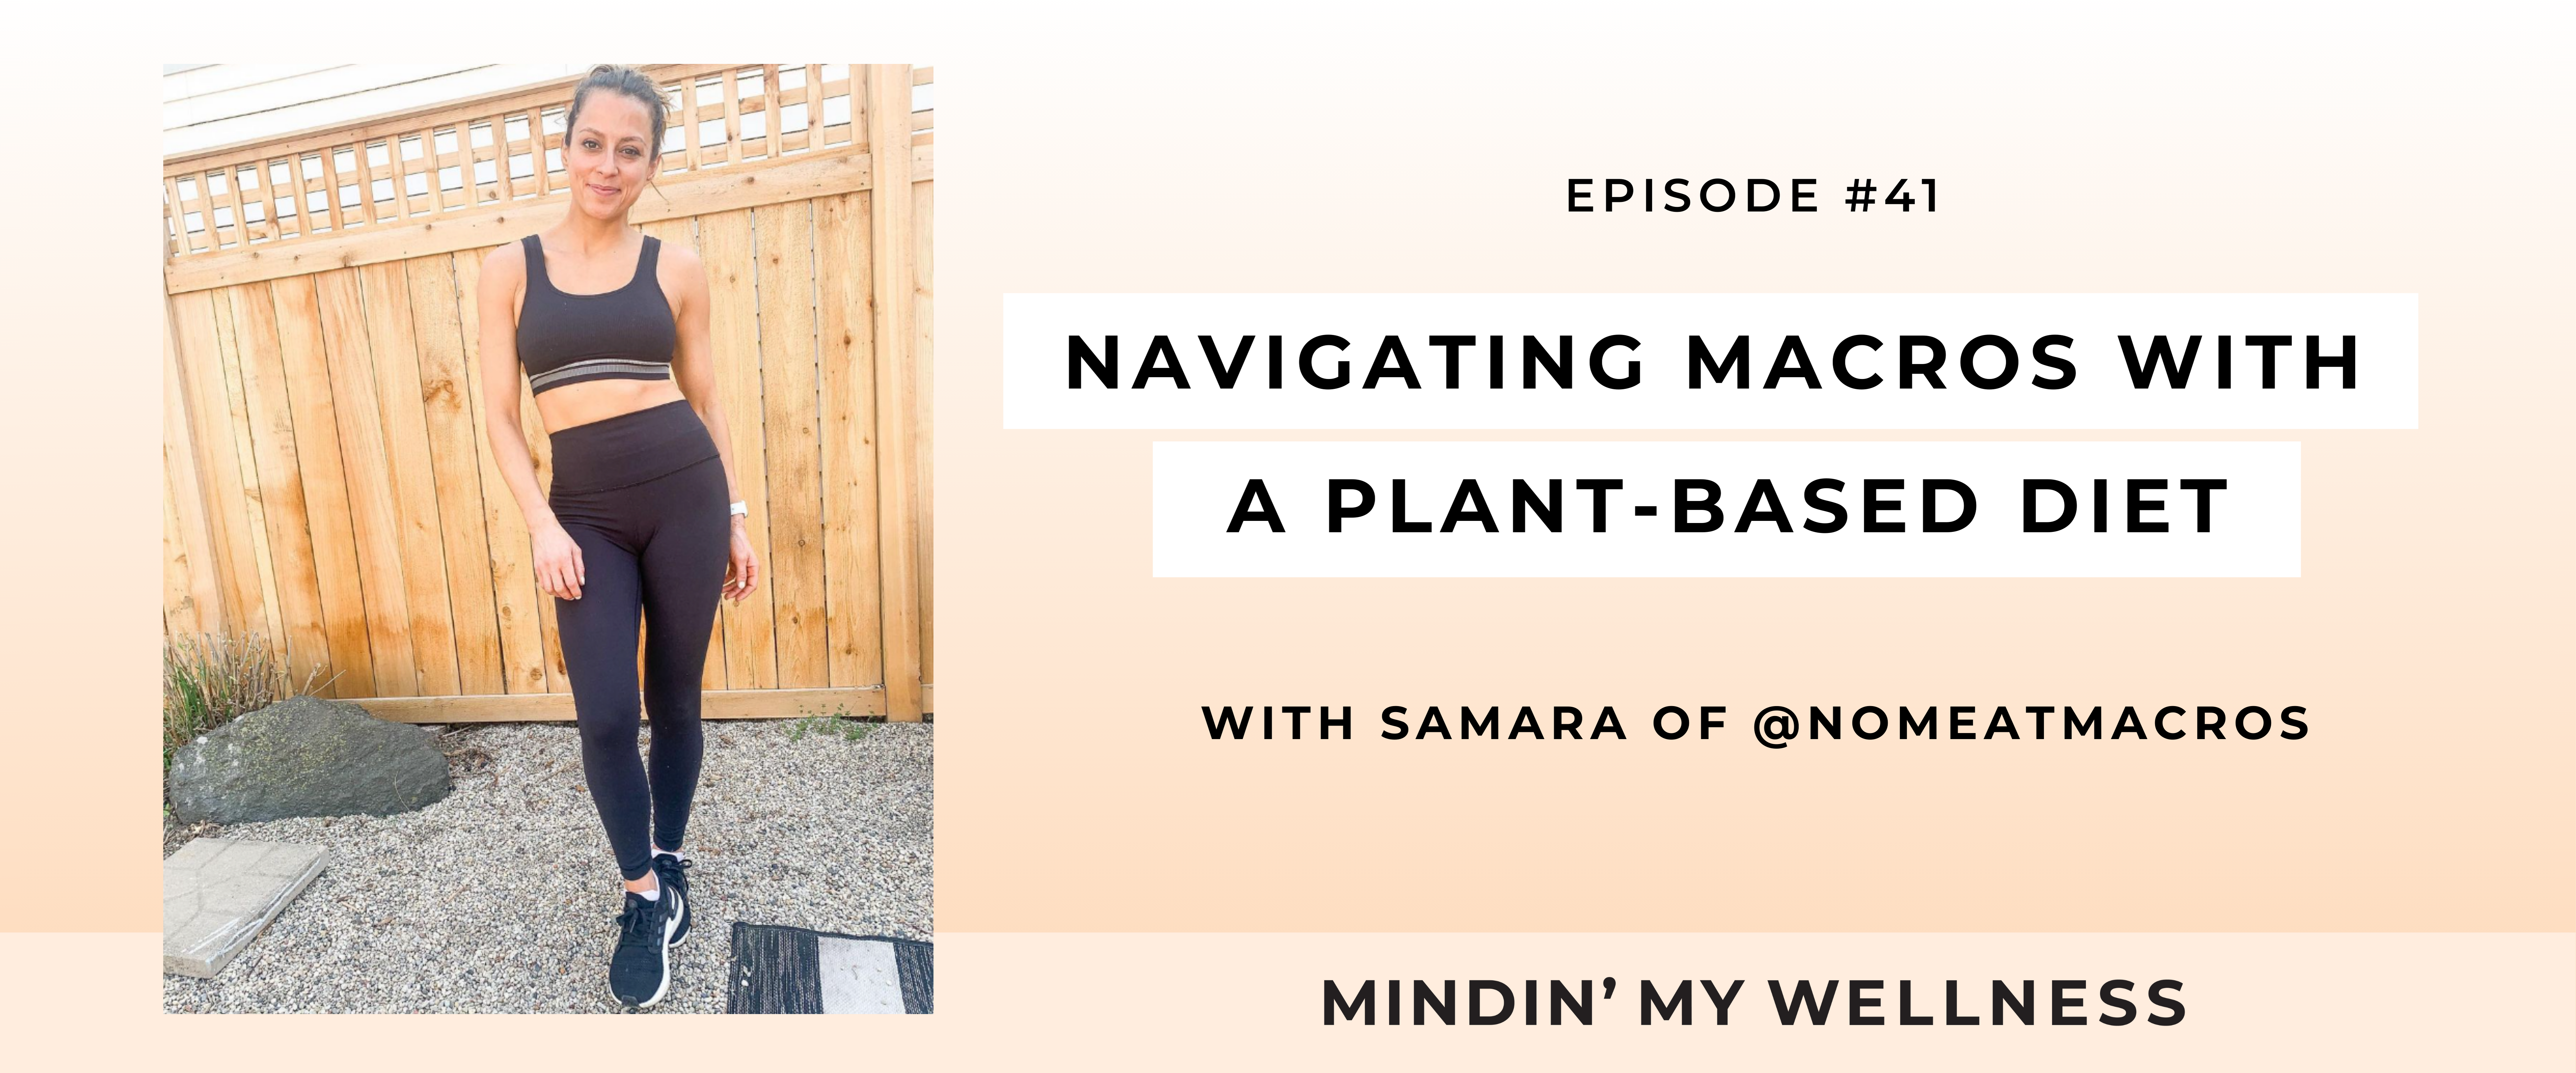 Navigating Macros With a Plant-Based Diet with Samara of @nomeatmacros